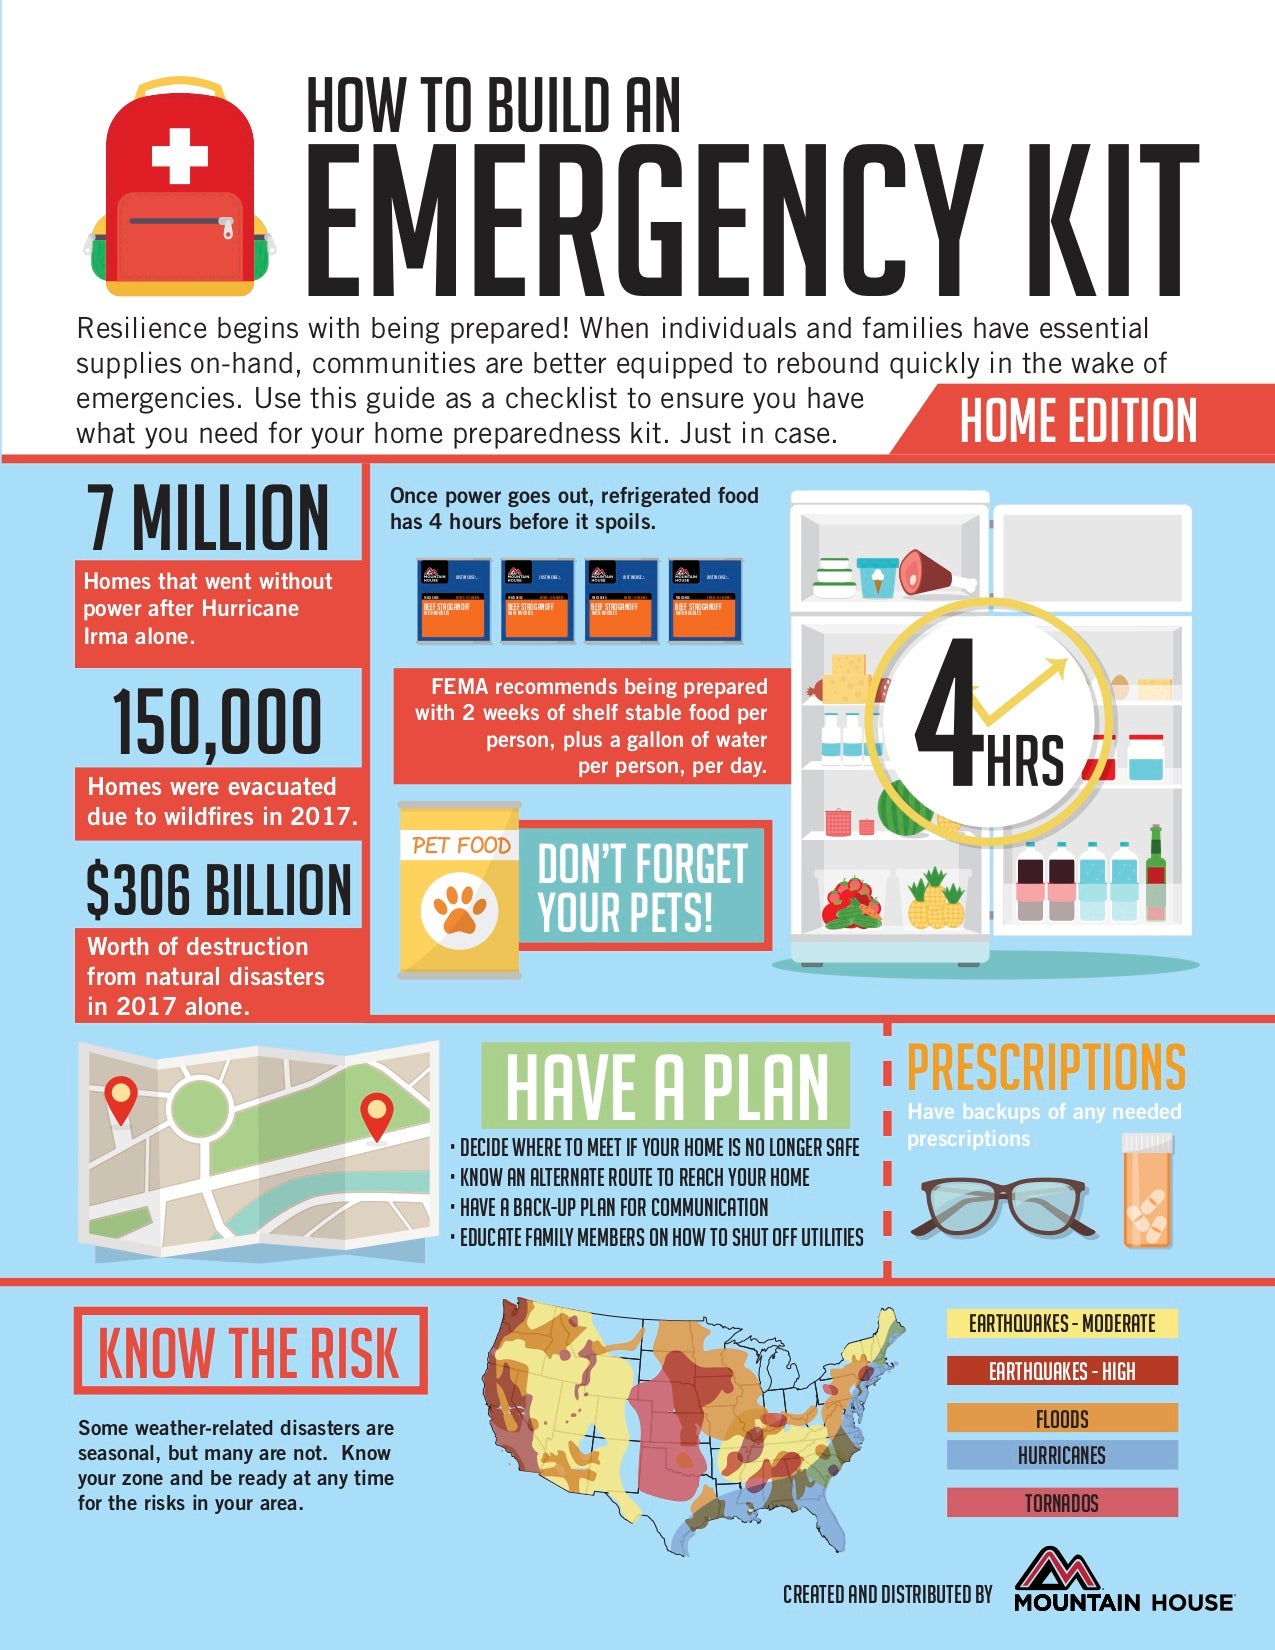 Making Your Emergency Survival Supply Kit